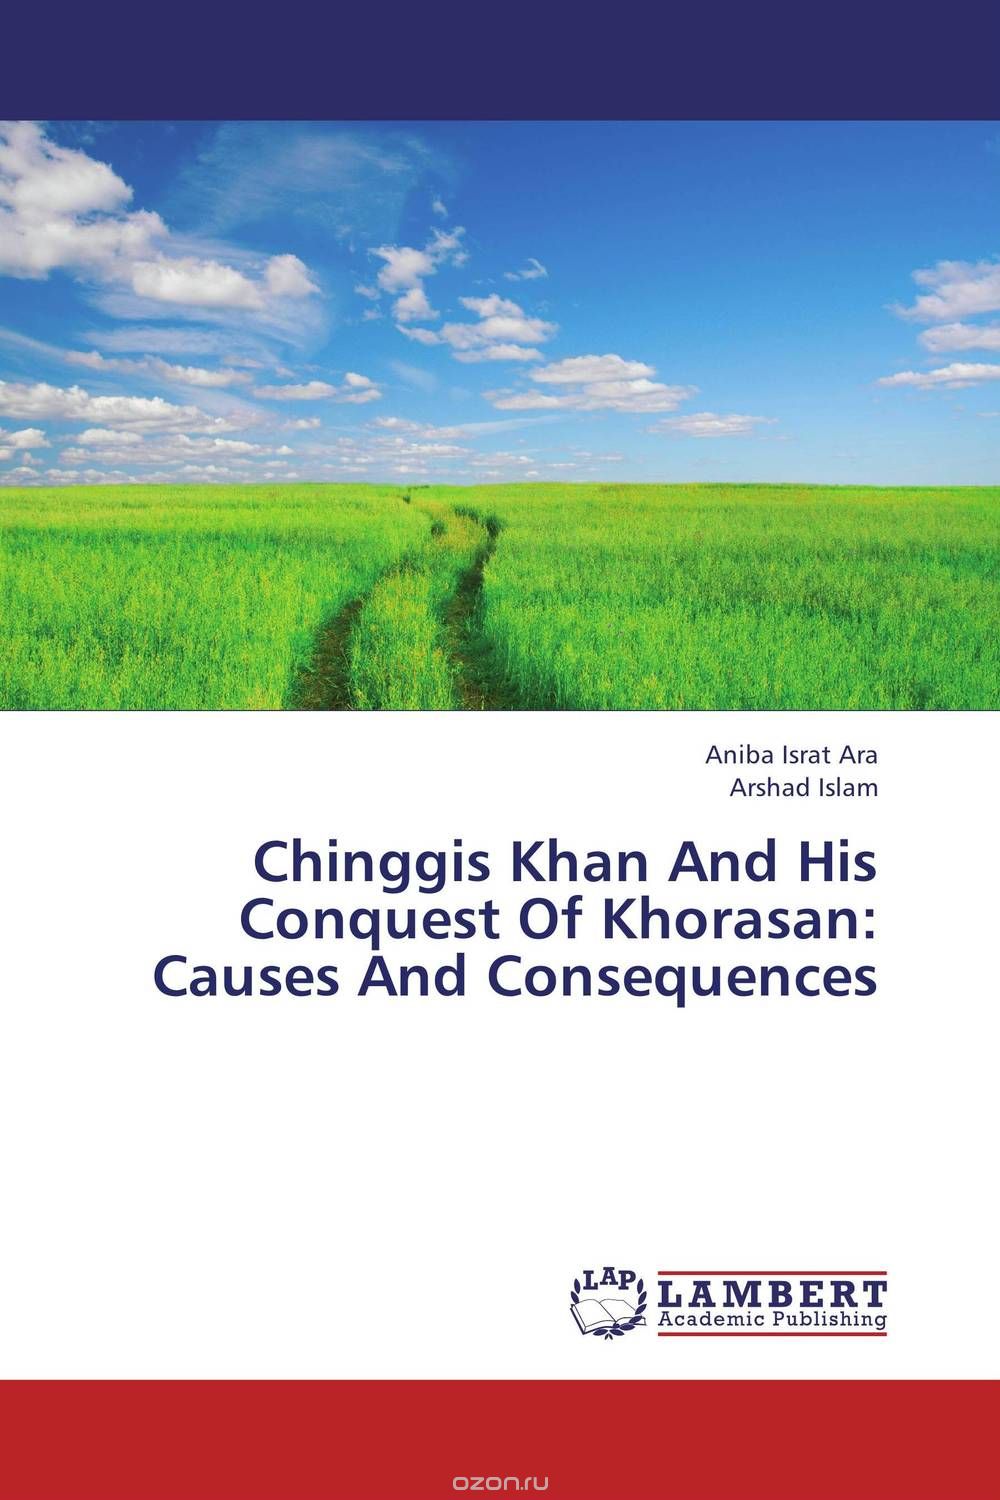 Скачать книгу "Chinggis Khan And His Conquest Of Khorasan: Causes And Consequences"